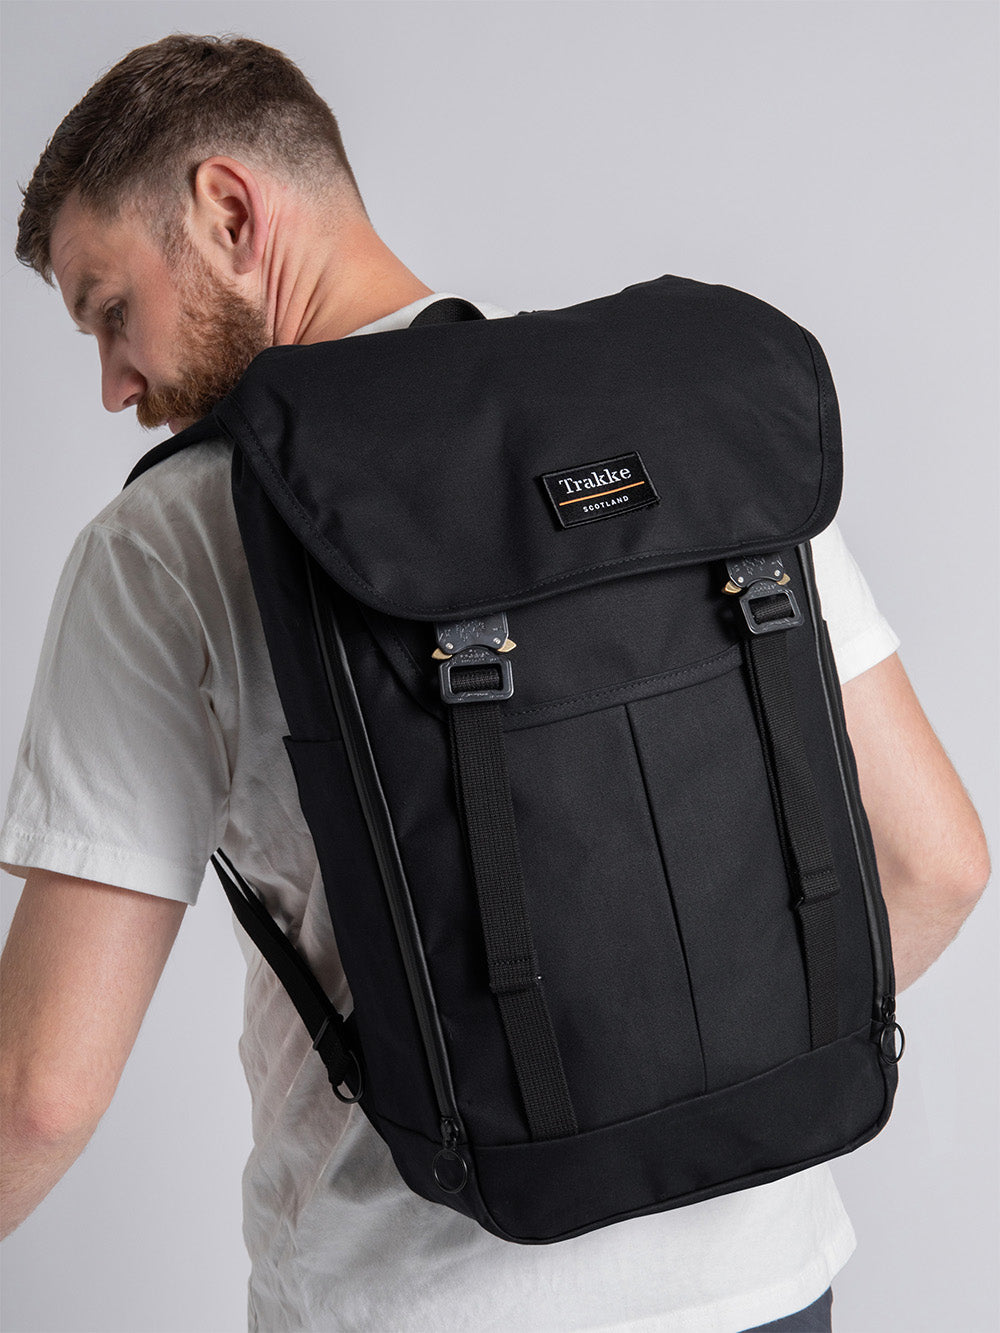 The Bannoch Pro Backpack from Trakke - a man is wearing the bannoch pro backpack on his back, the colour of the backpack is black. The image shows the full length of the backpack and a few features such as two COBRA buckles, the trakke velcro patch and external zips